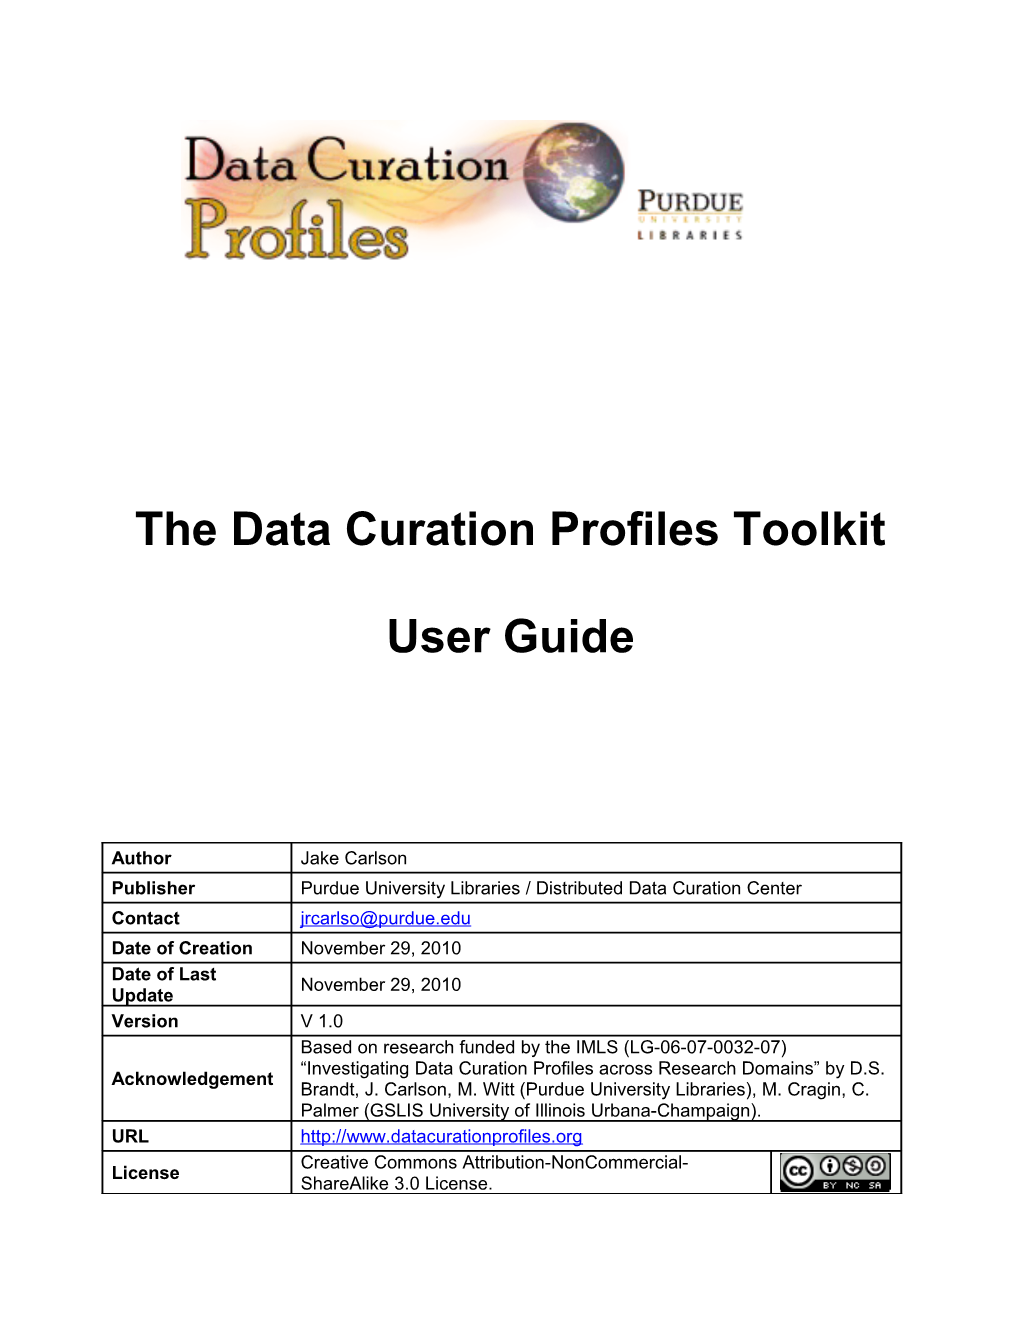 The Data Curation Profiles Toolkit